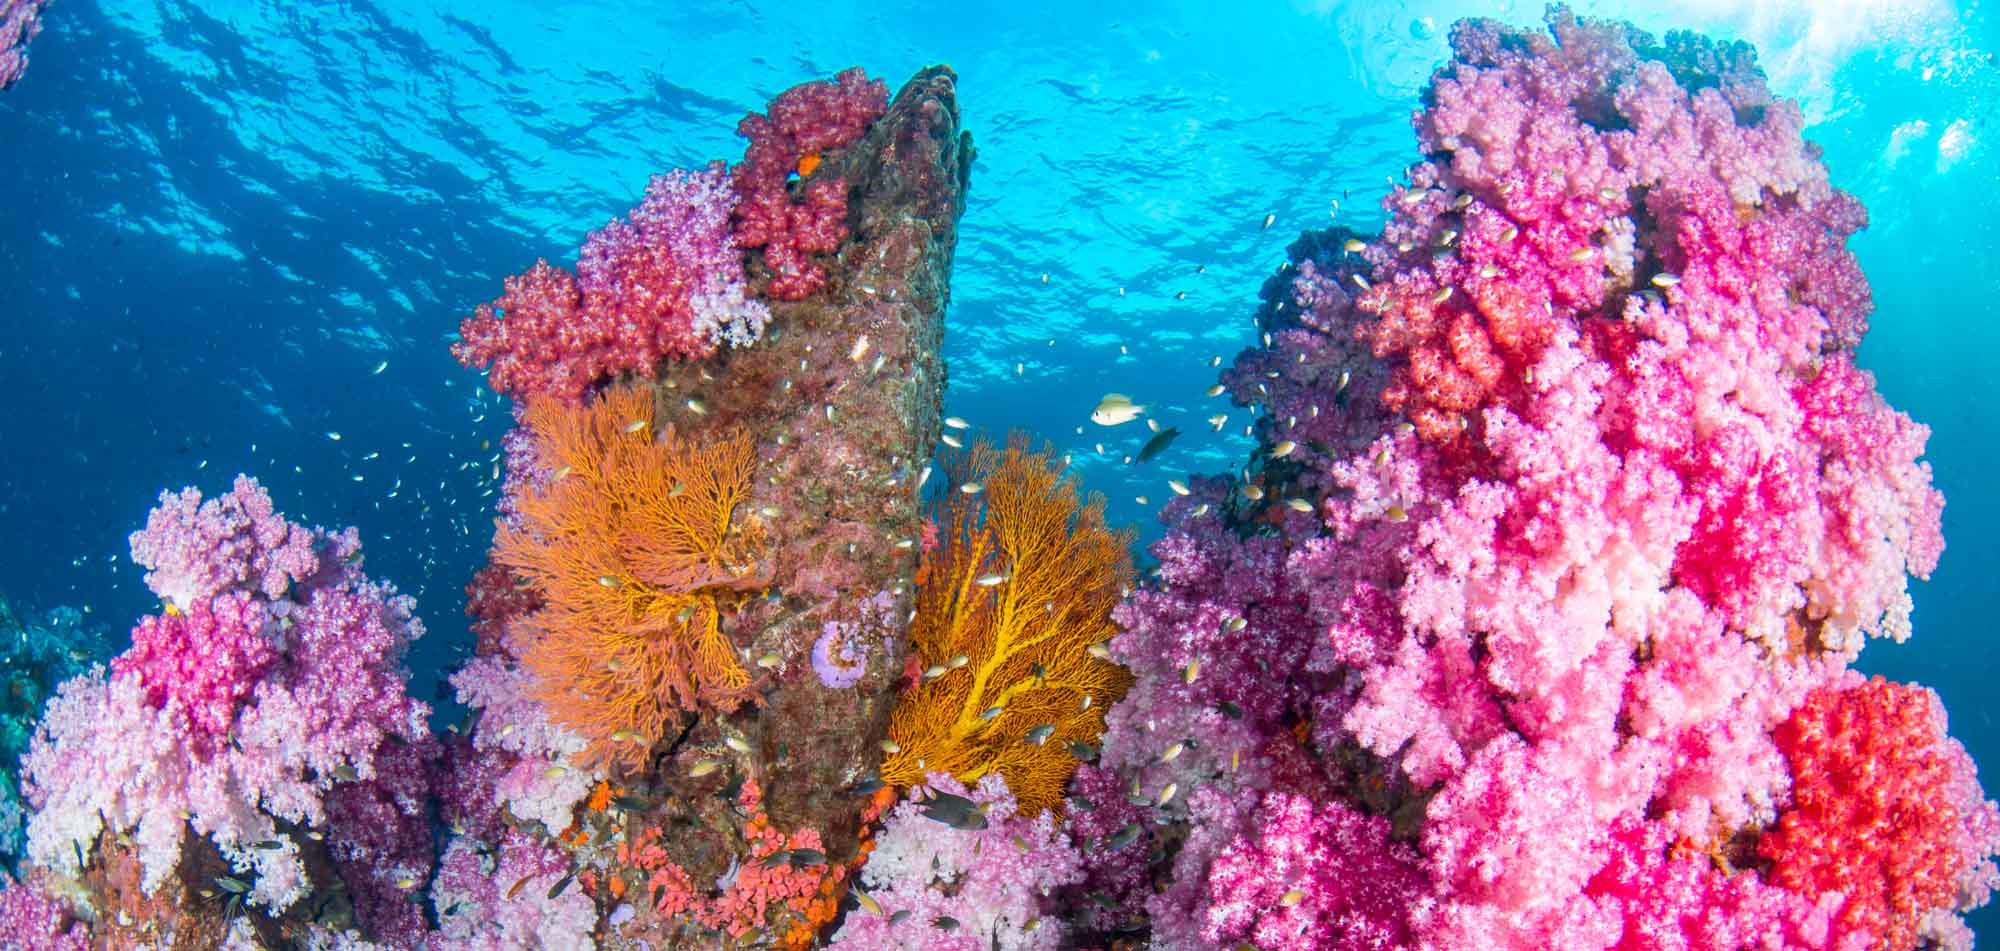 Vibrant coral reef with small fish surrounding it, captured during a yacht charter in Raja Ampat